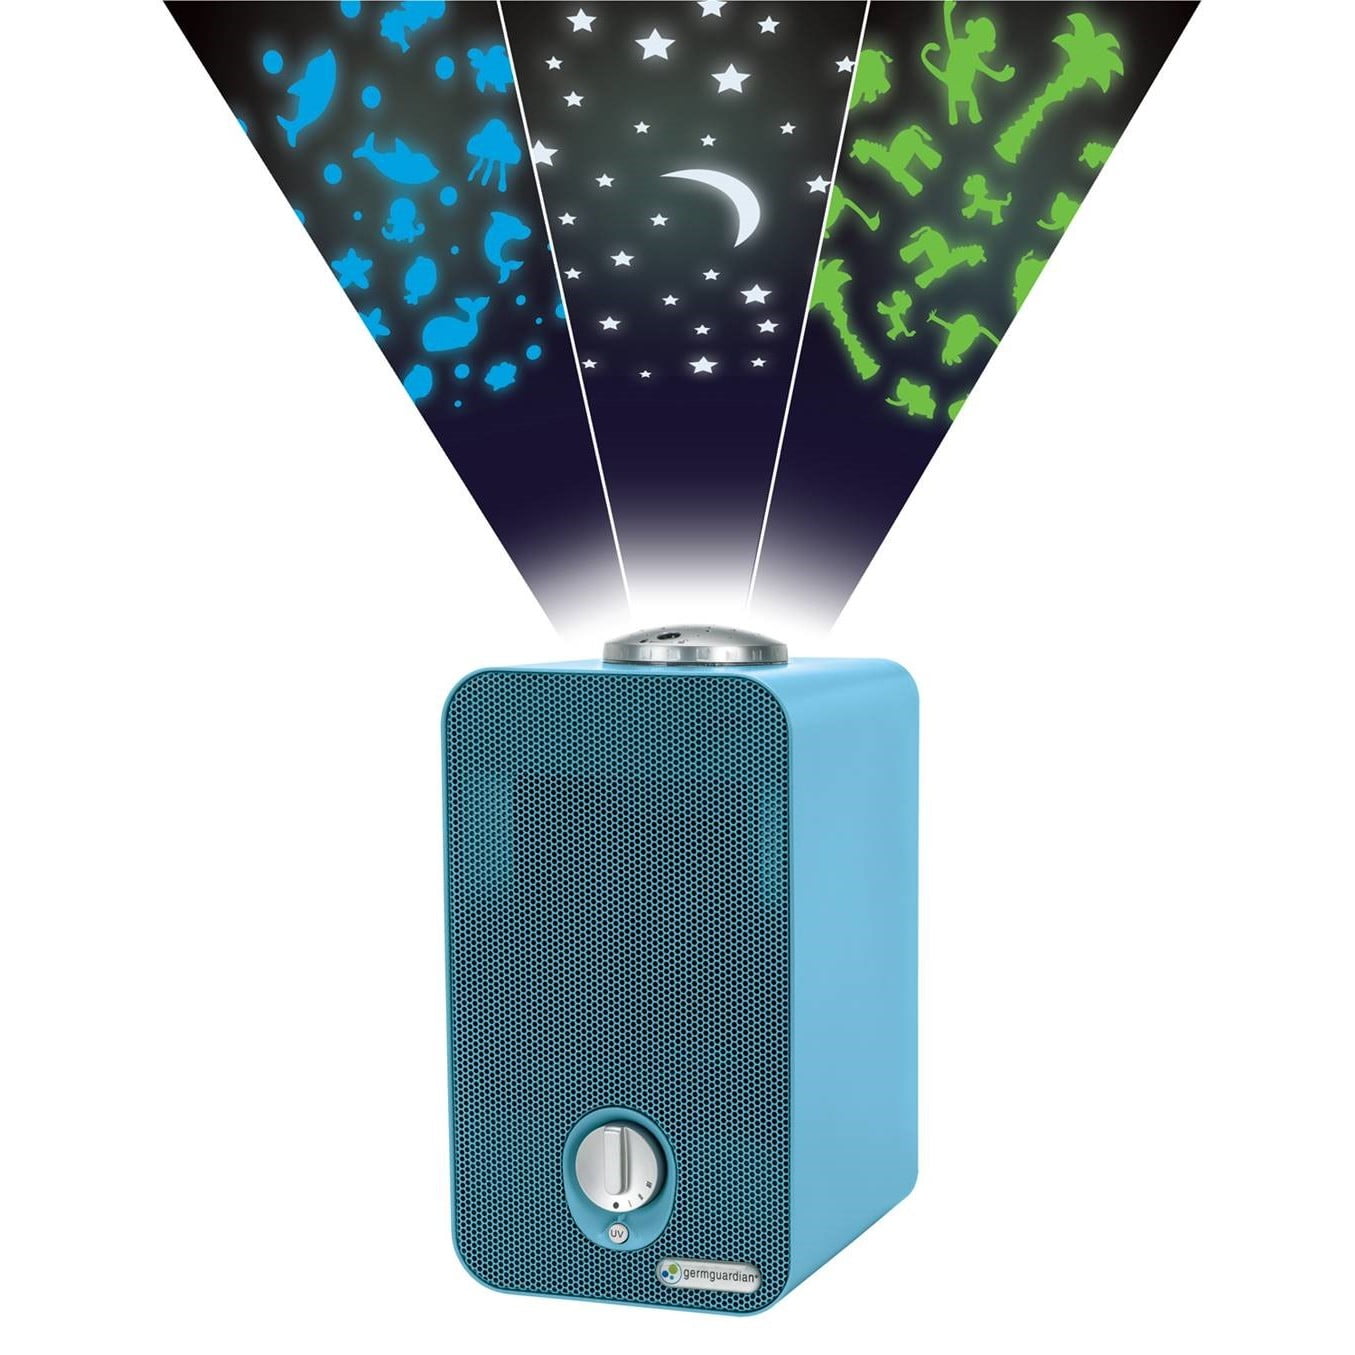 GermGuardian Air Purifier with HEPA Filter, Night Light Projector and UV-C,  AC4150BLCA